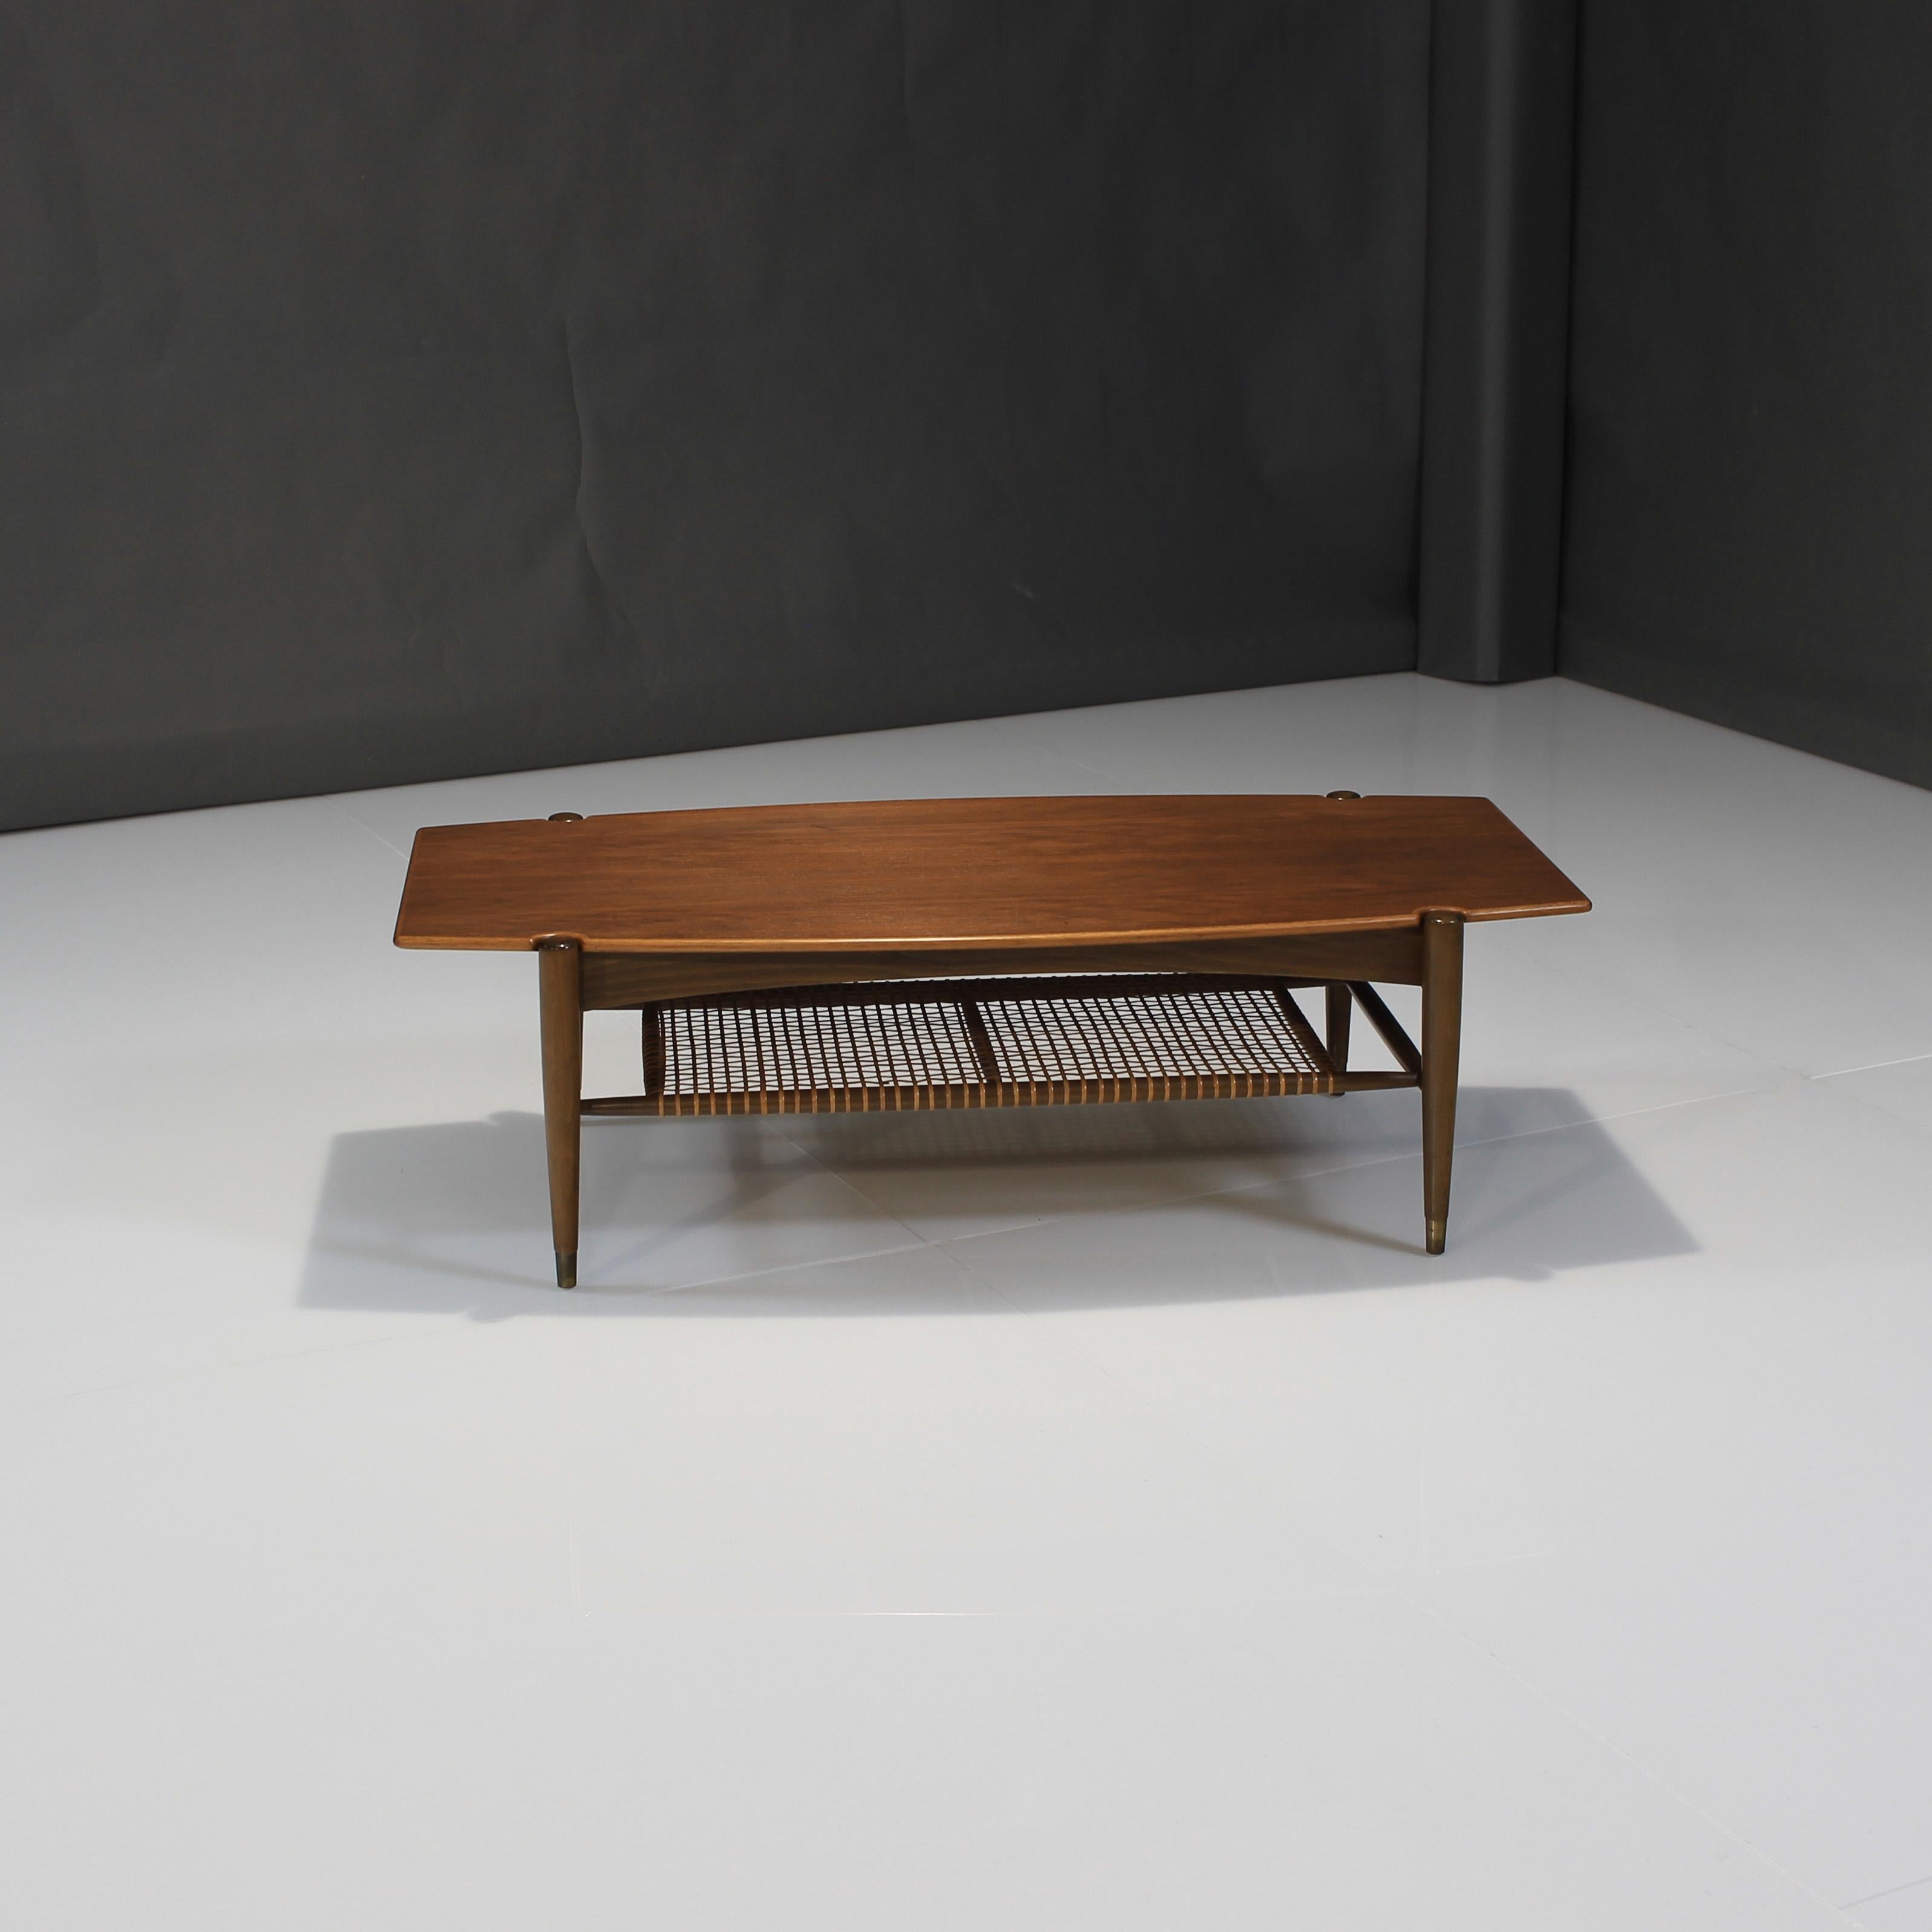 Scandinavian Modern Mid-20th Century Teak and Cane Coffee Table by Folke Ohlsson